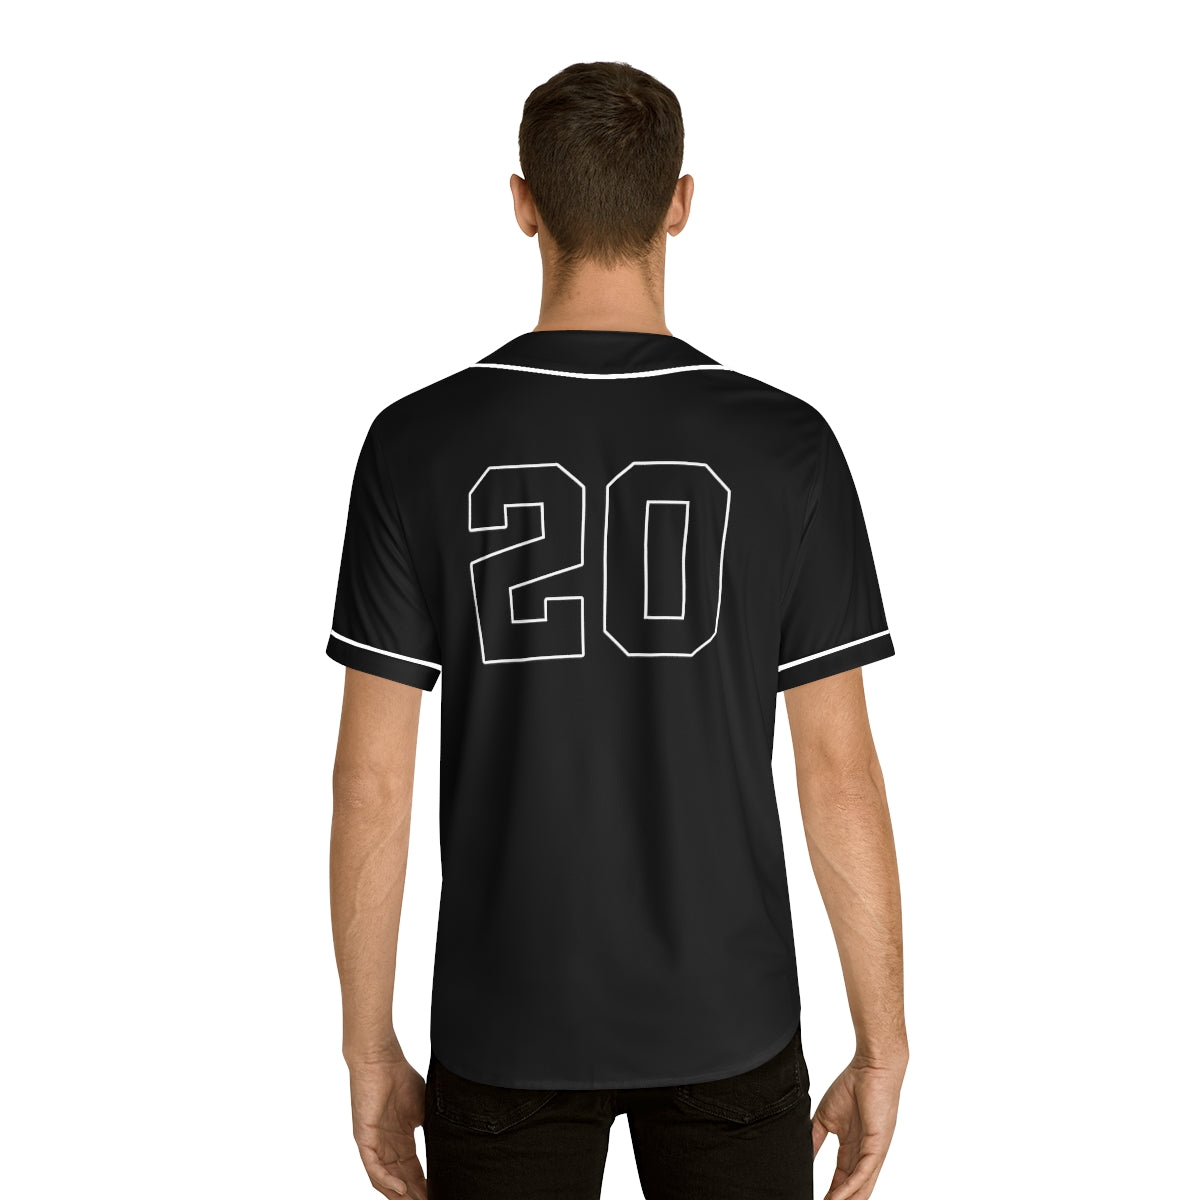  AOVL Personalized Baber Baseball Jersey Baber Shop Shirts  Barber Gift Men Barber Professional Baseball Jersey Hair Stylist (Barber 1)  : Clothing, Shoes & Jewelry